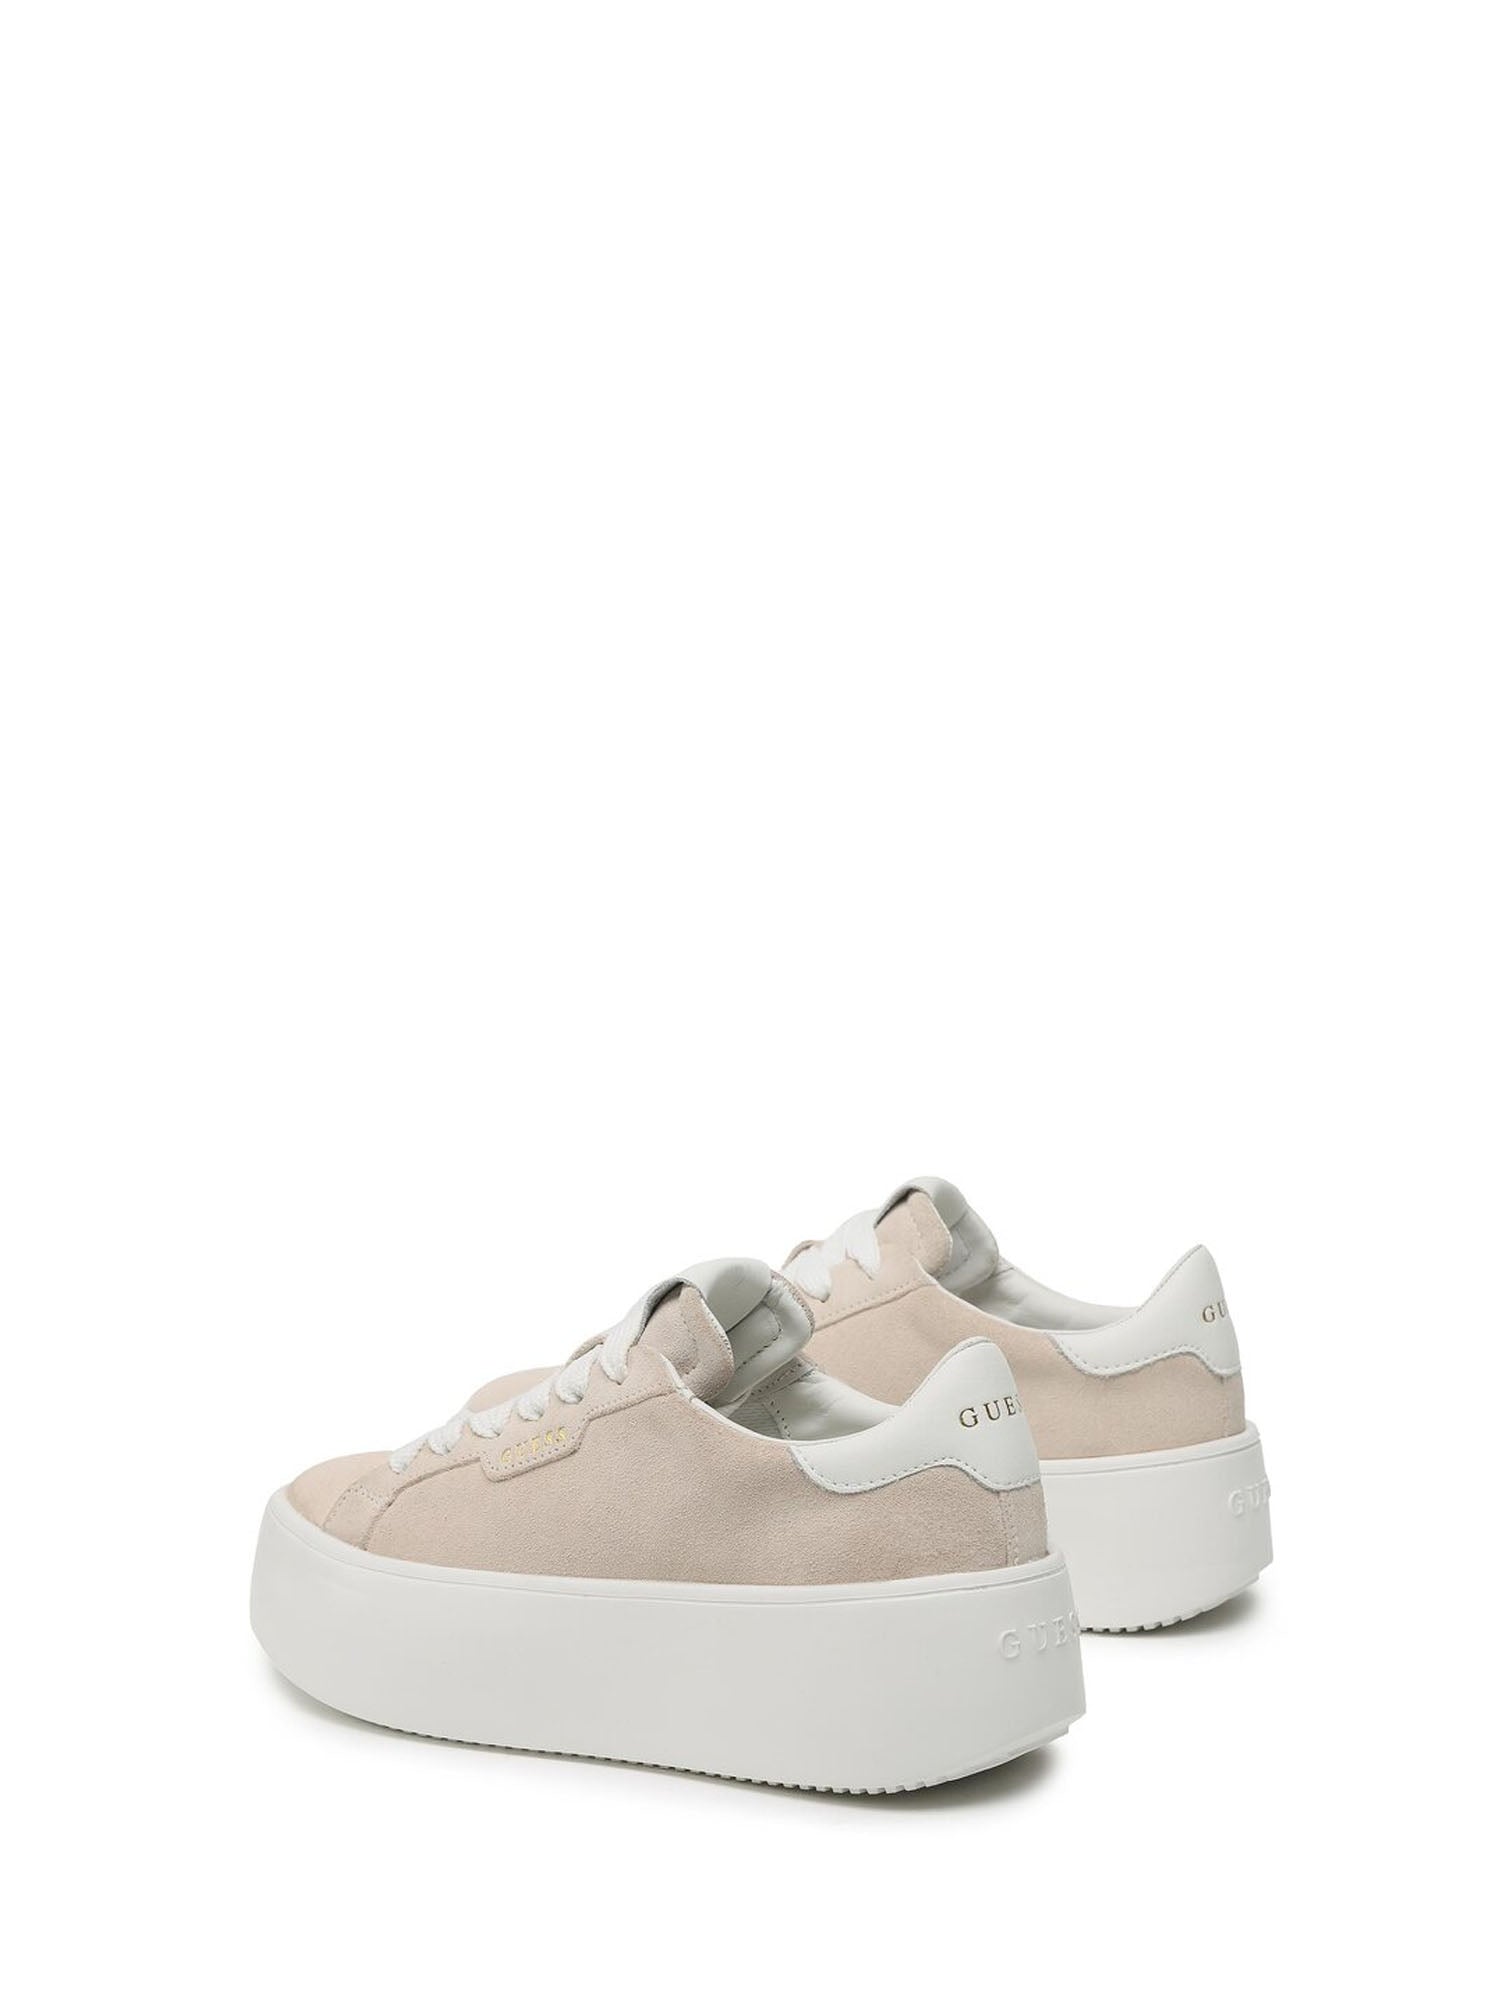 GUESS JEANS SHOES SNEAKERS BASSE MARILYN ROSA-BIANCO